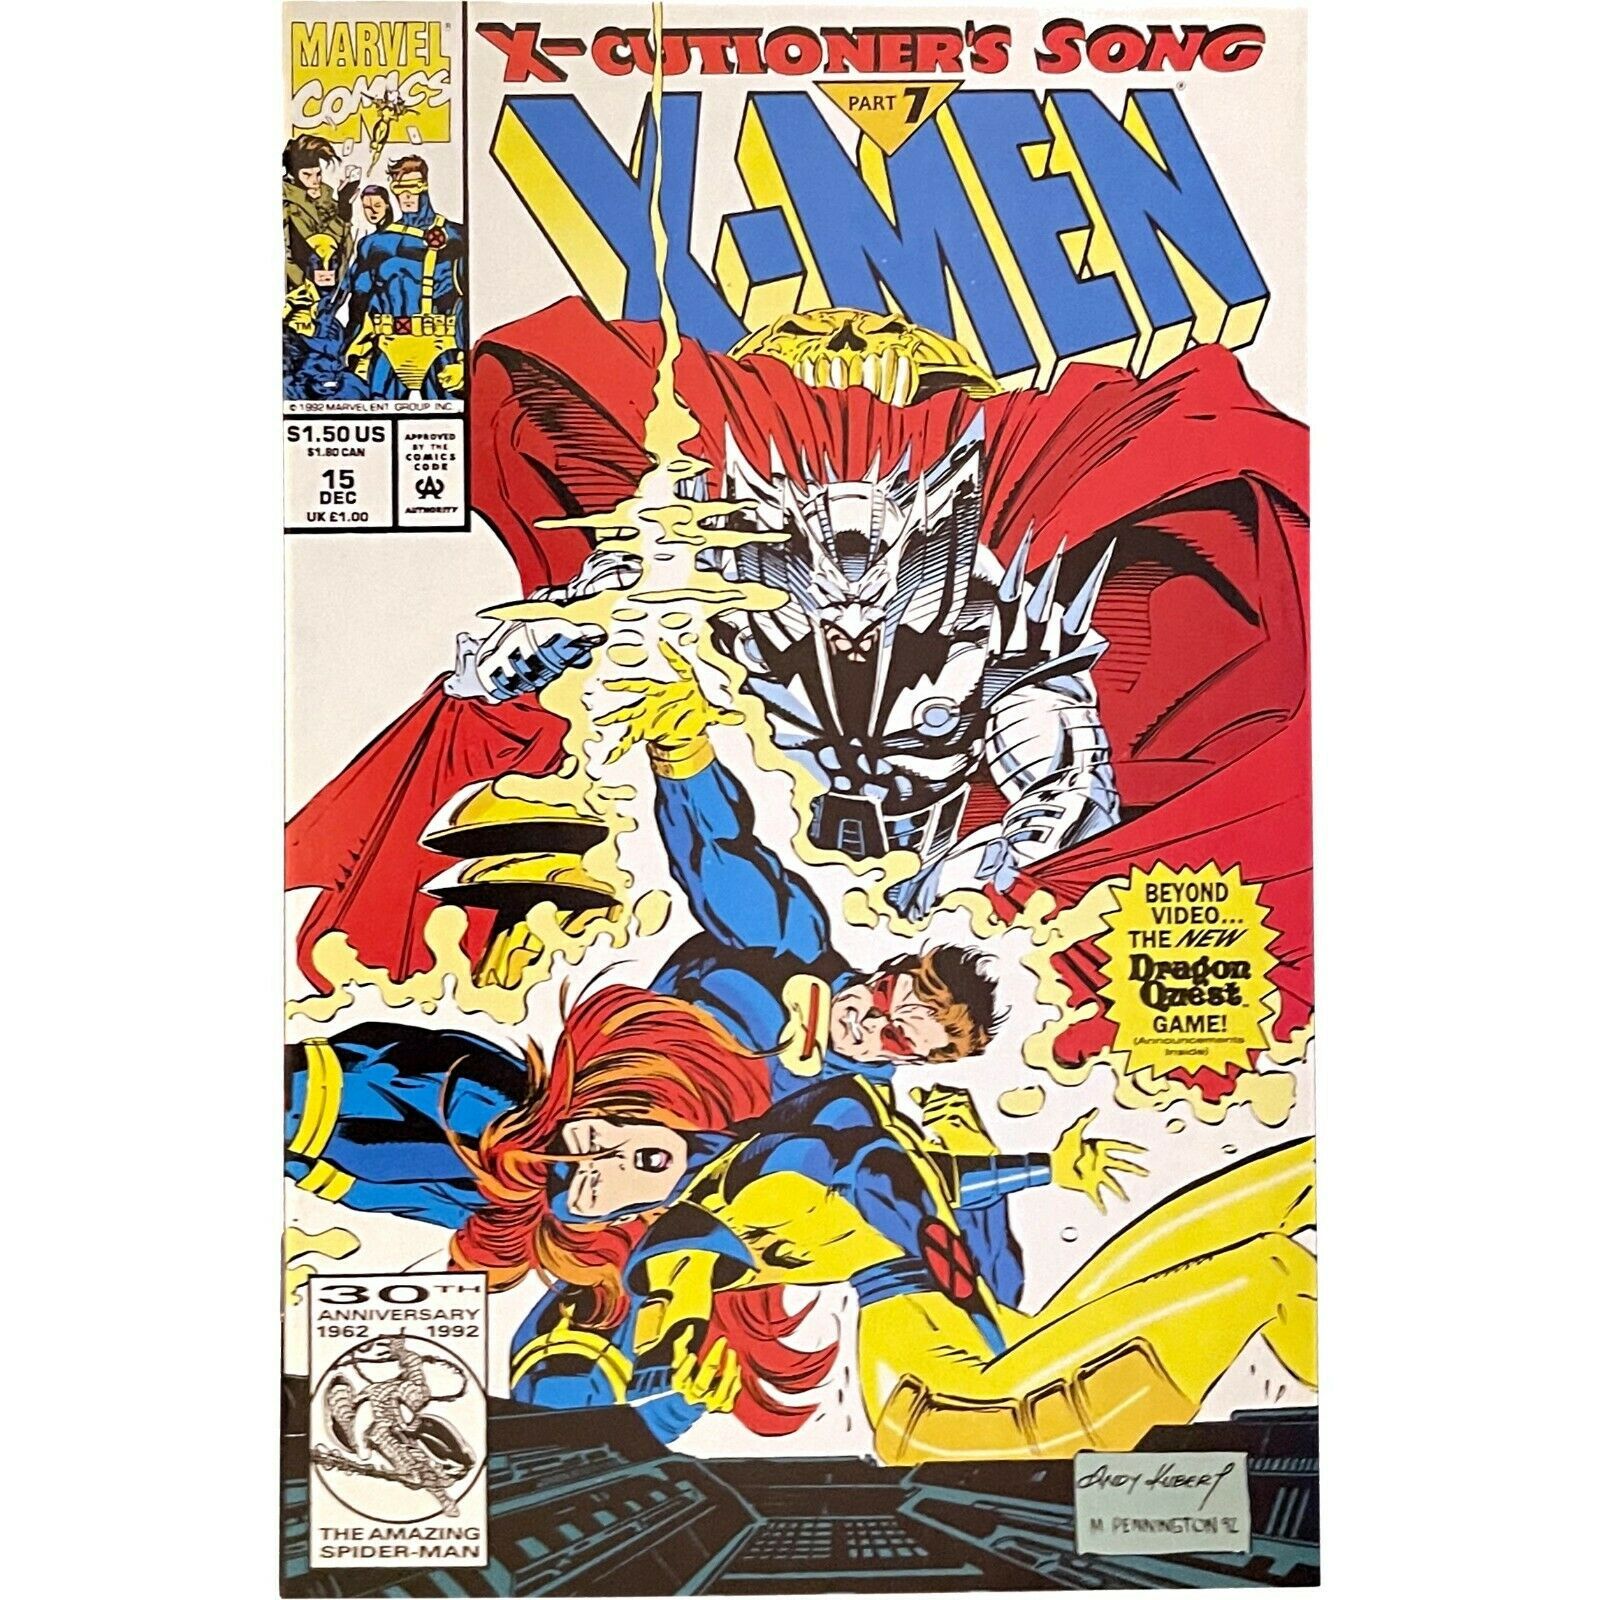 Primary image for X-Men #15 WITH TRADING CARD!!! (Dec 1992, Marvel) X-cutioner's Song part 7 comic